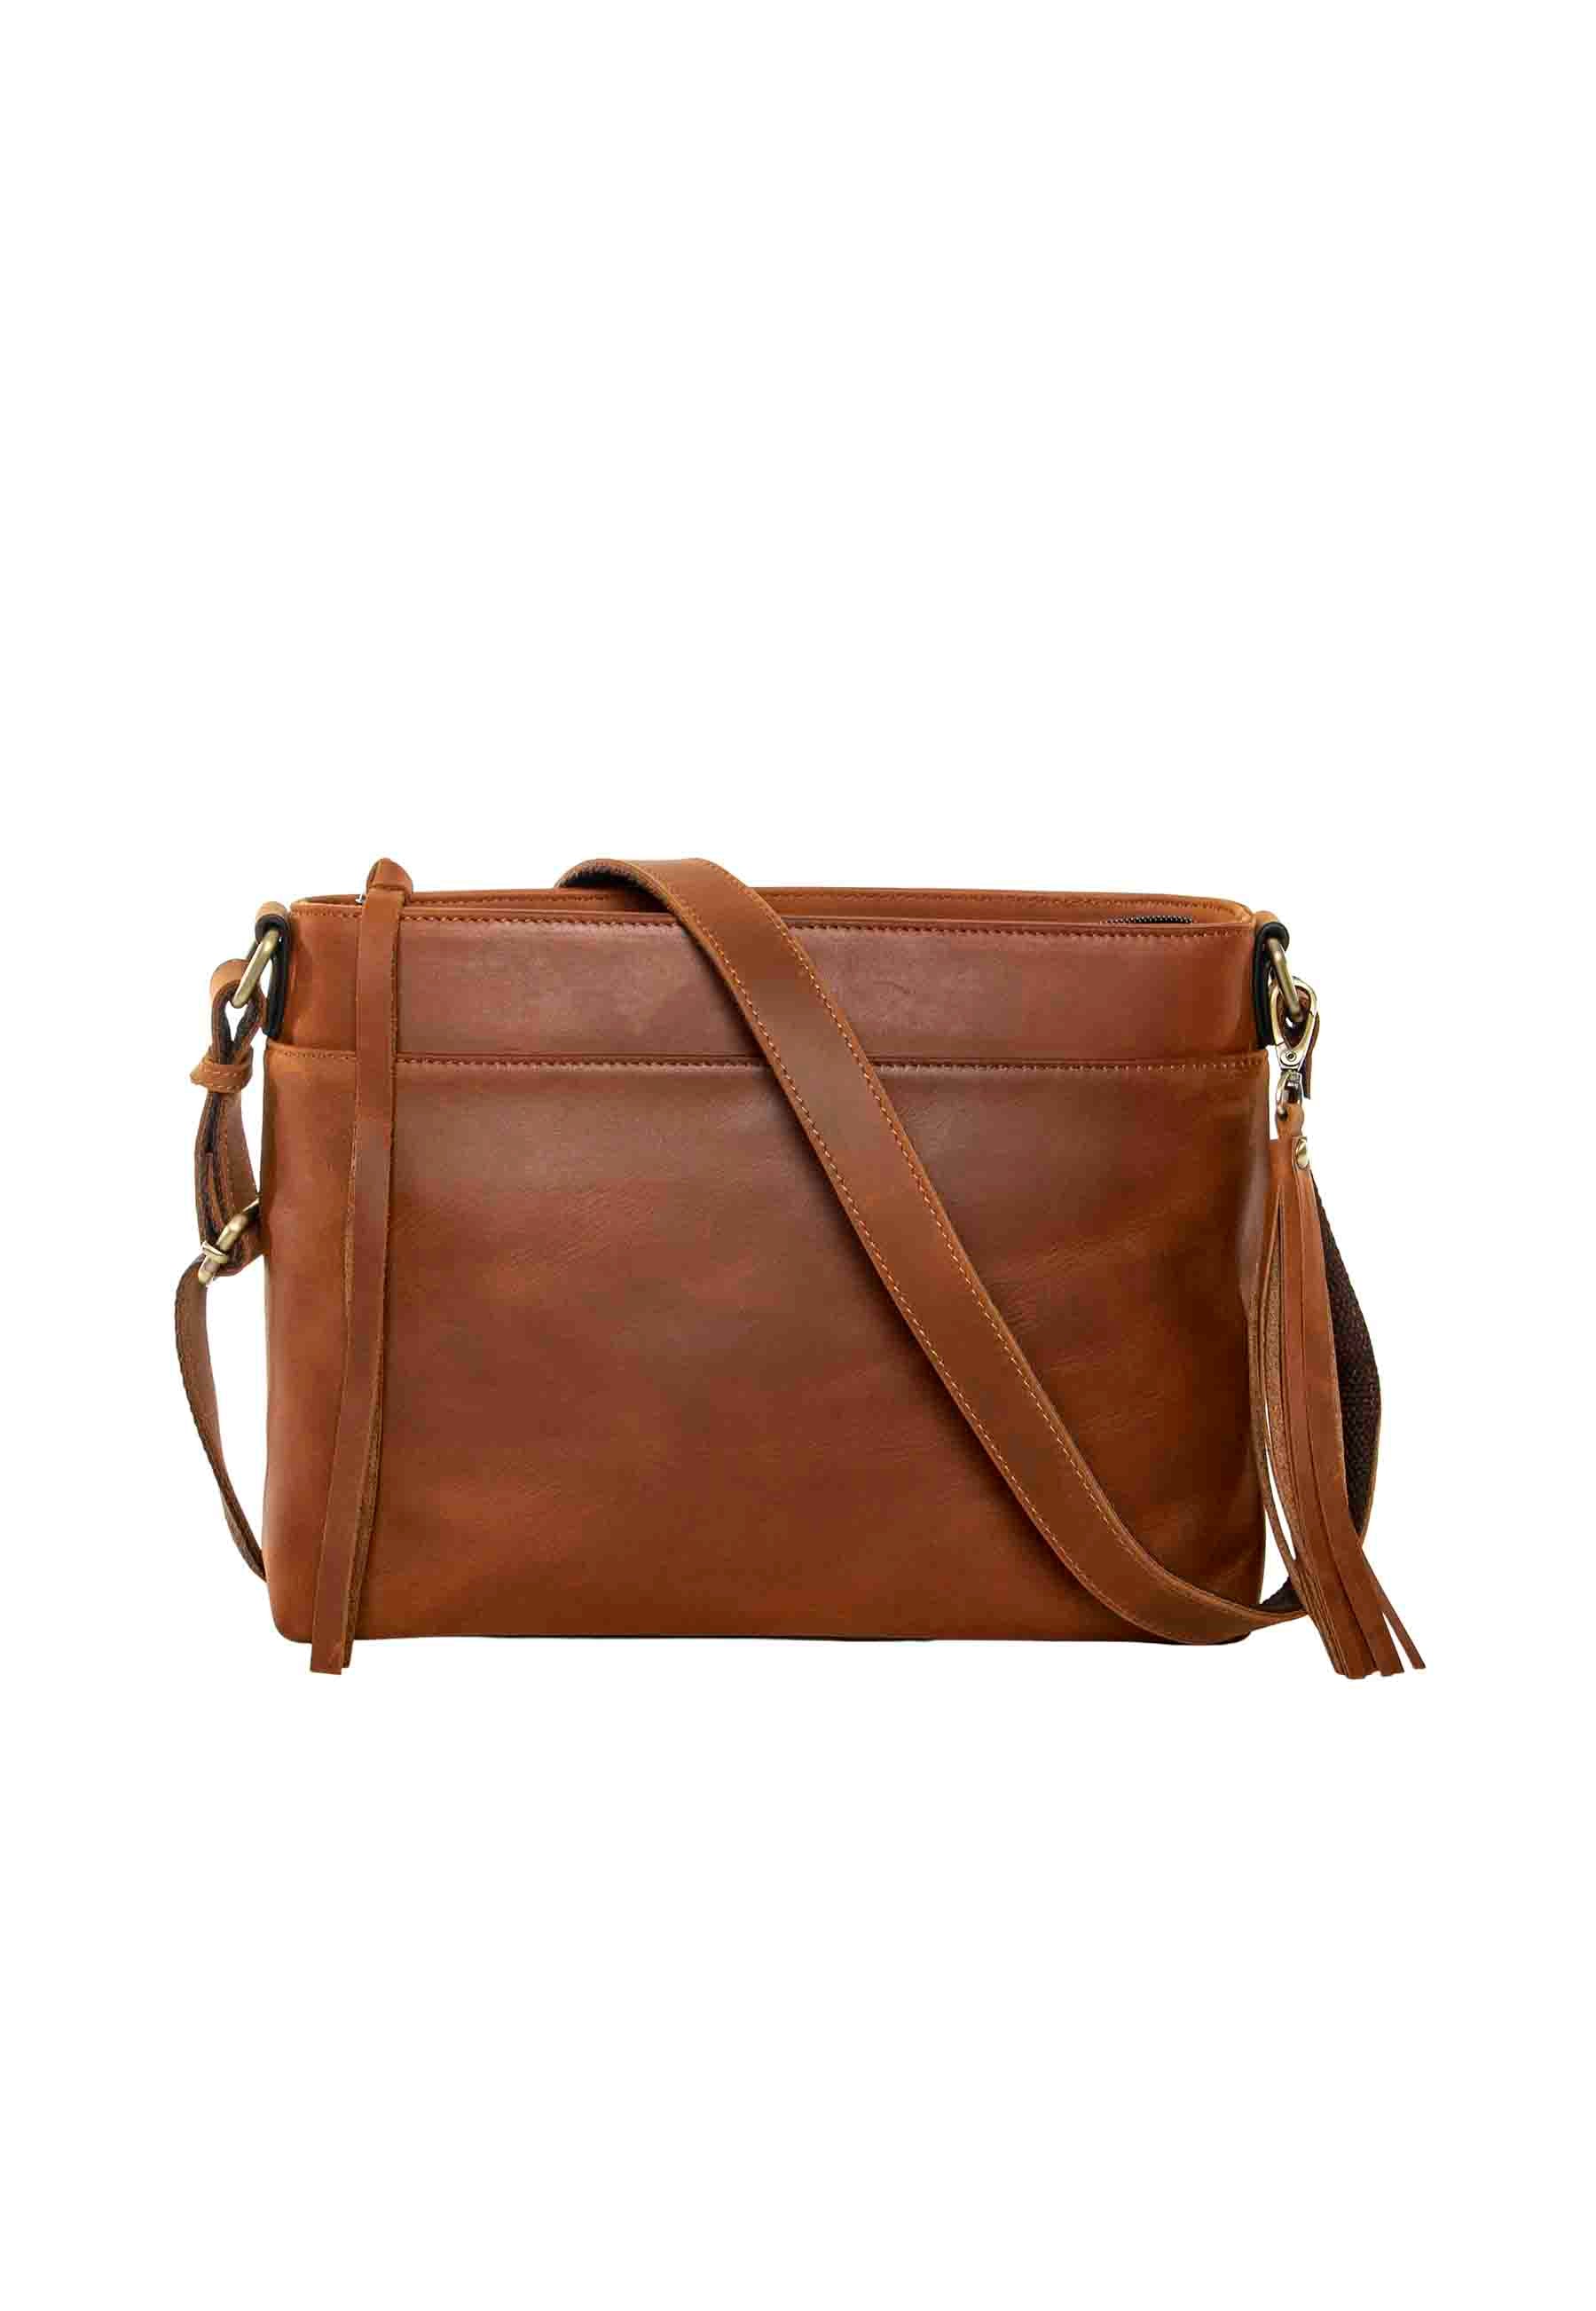 Top quality leather concealed carry purse in cognac leather